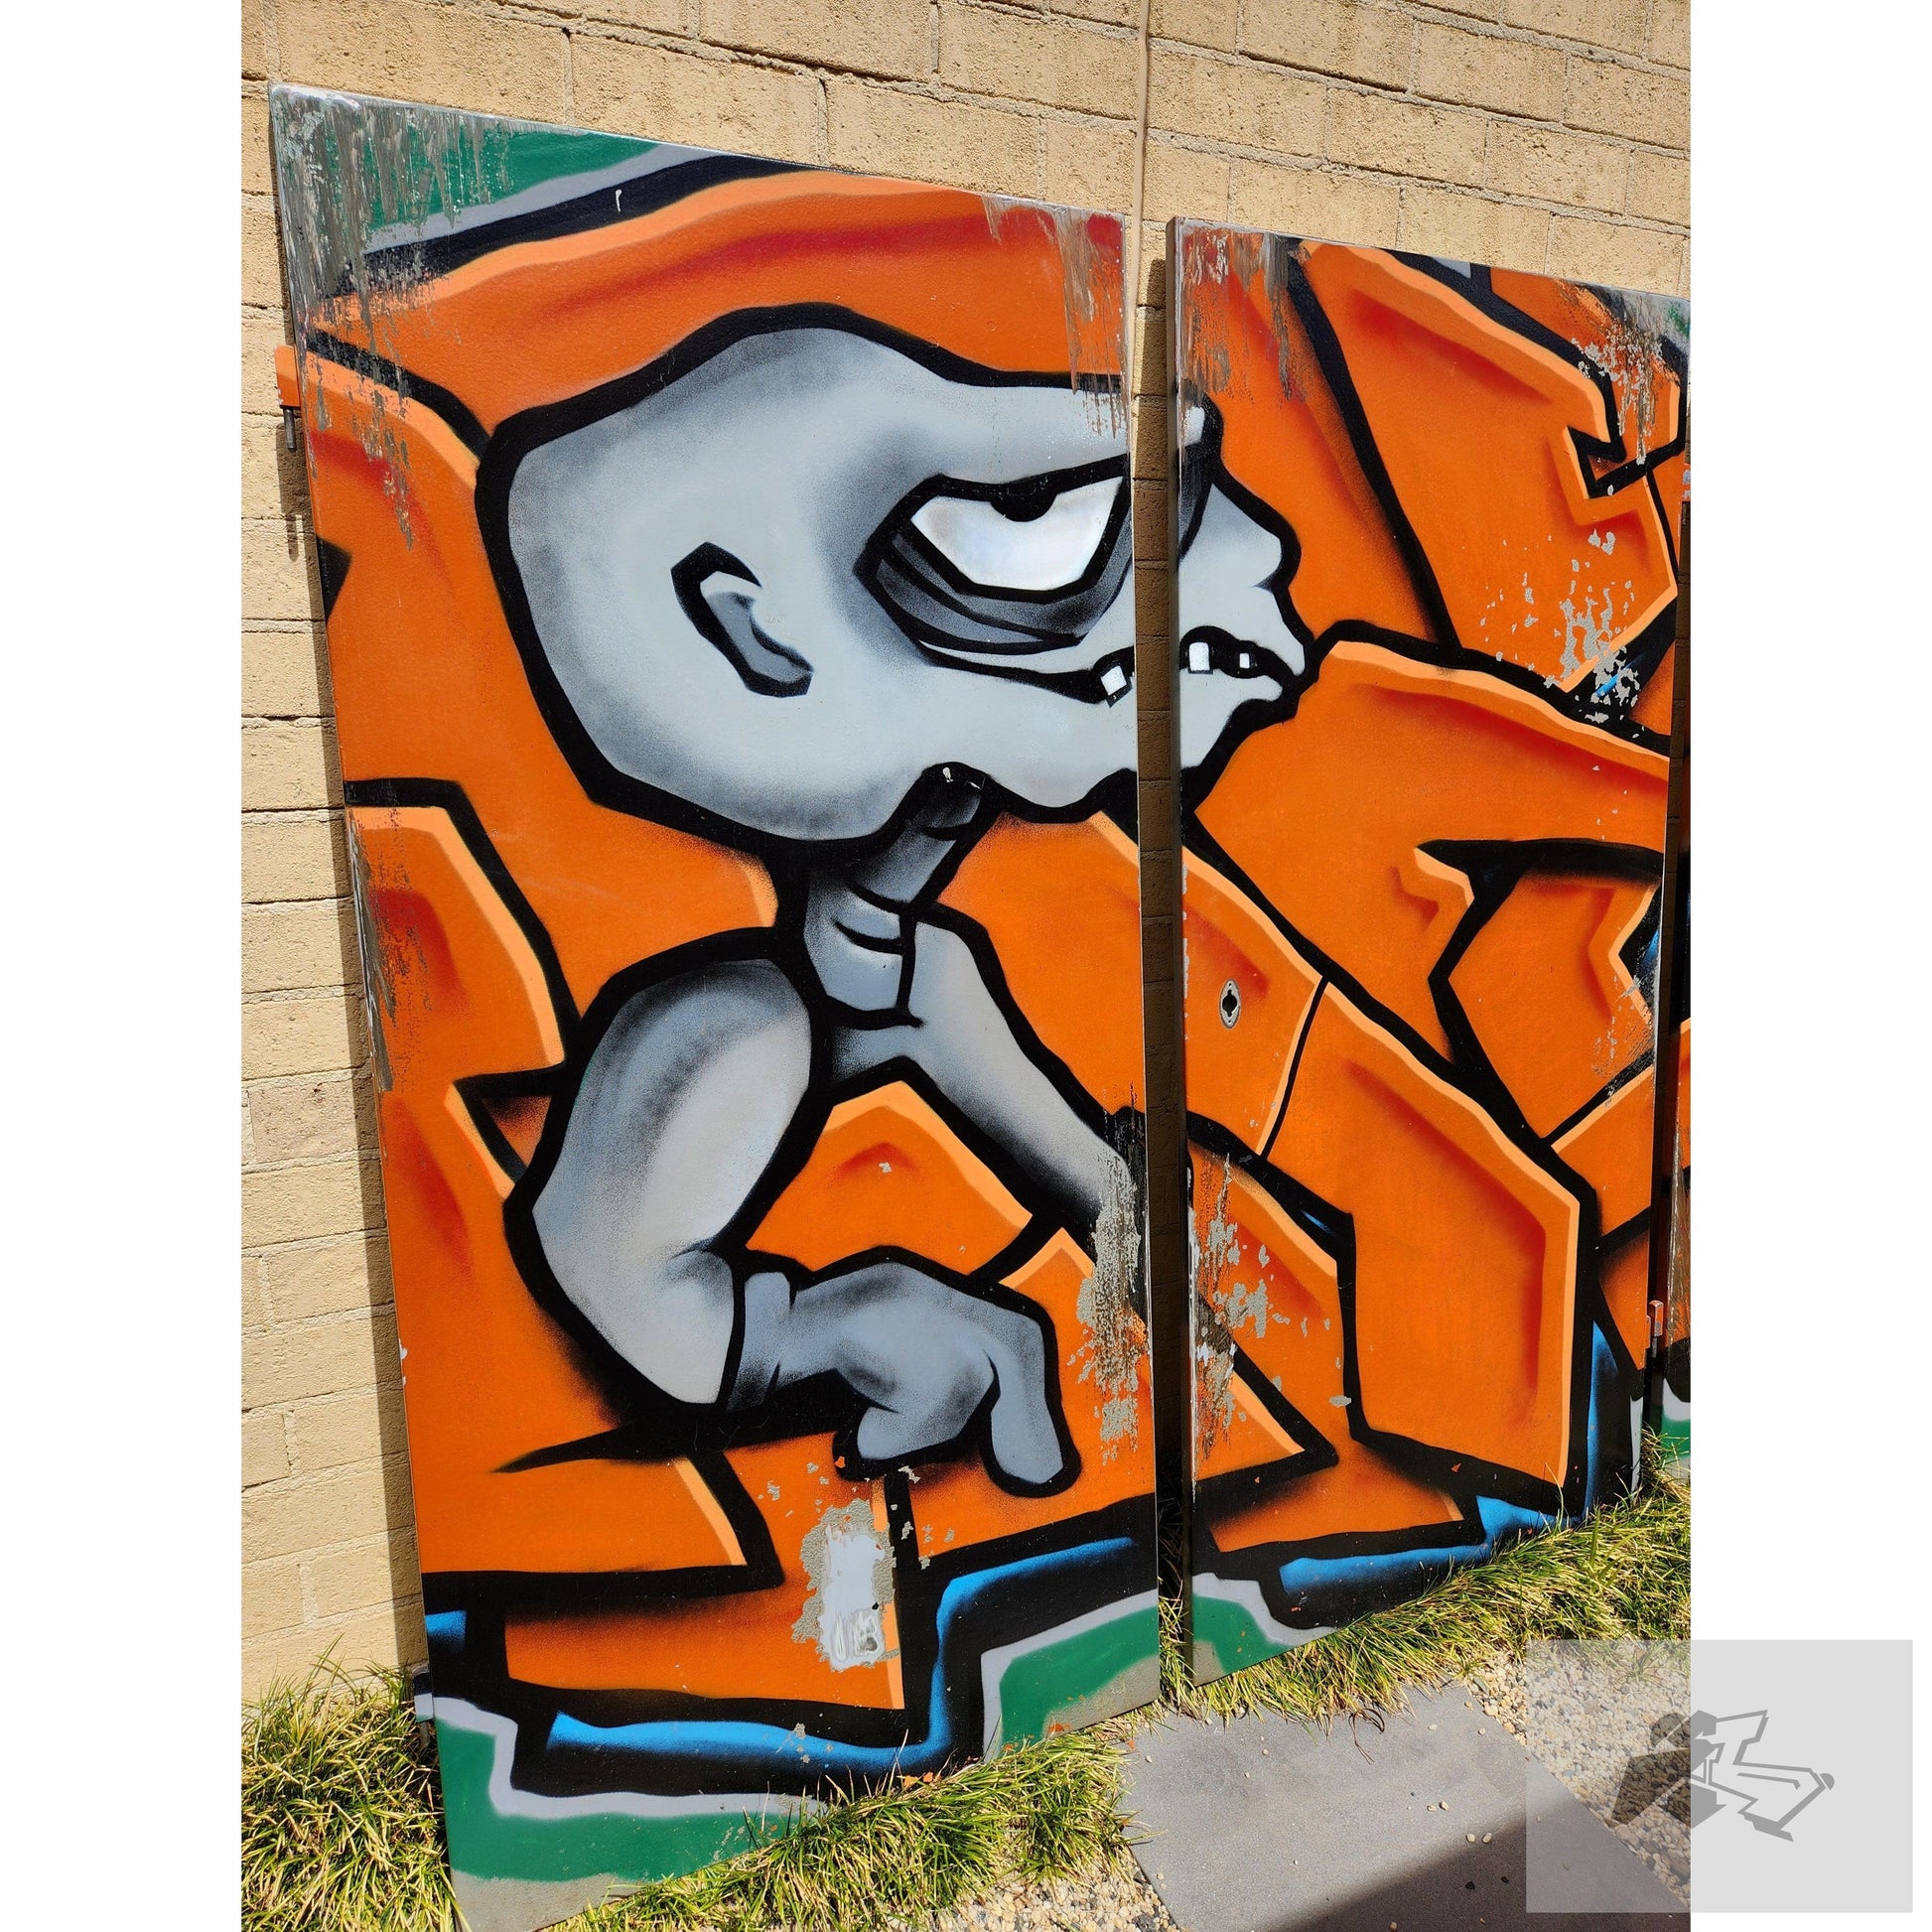 Four panel graffiti letters with skeleton character-Silence Melbourne